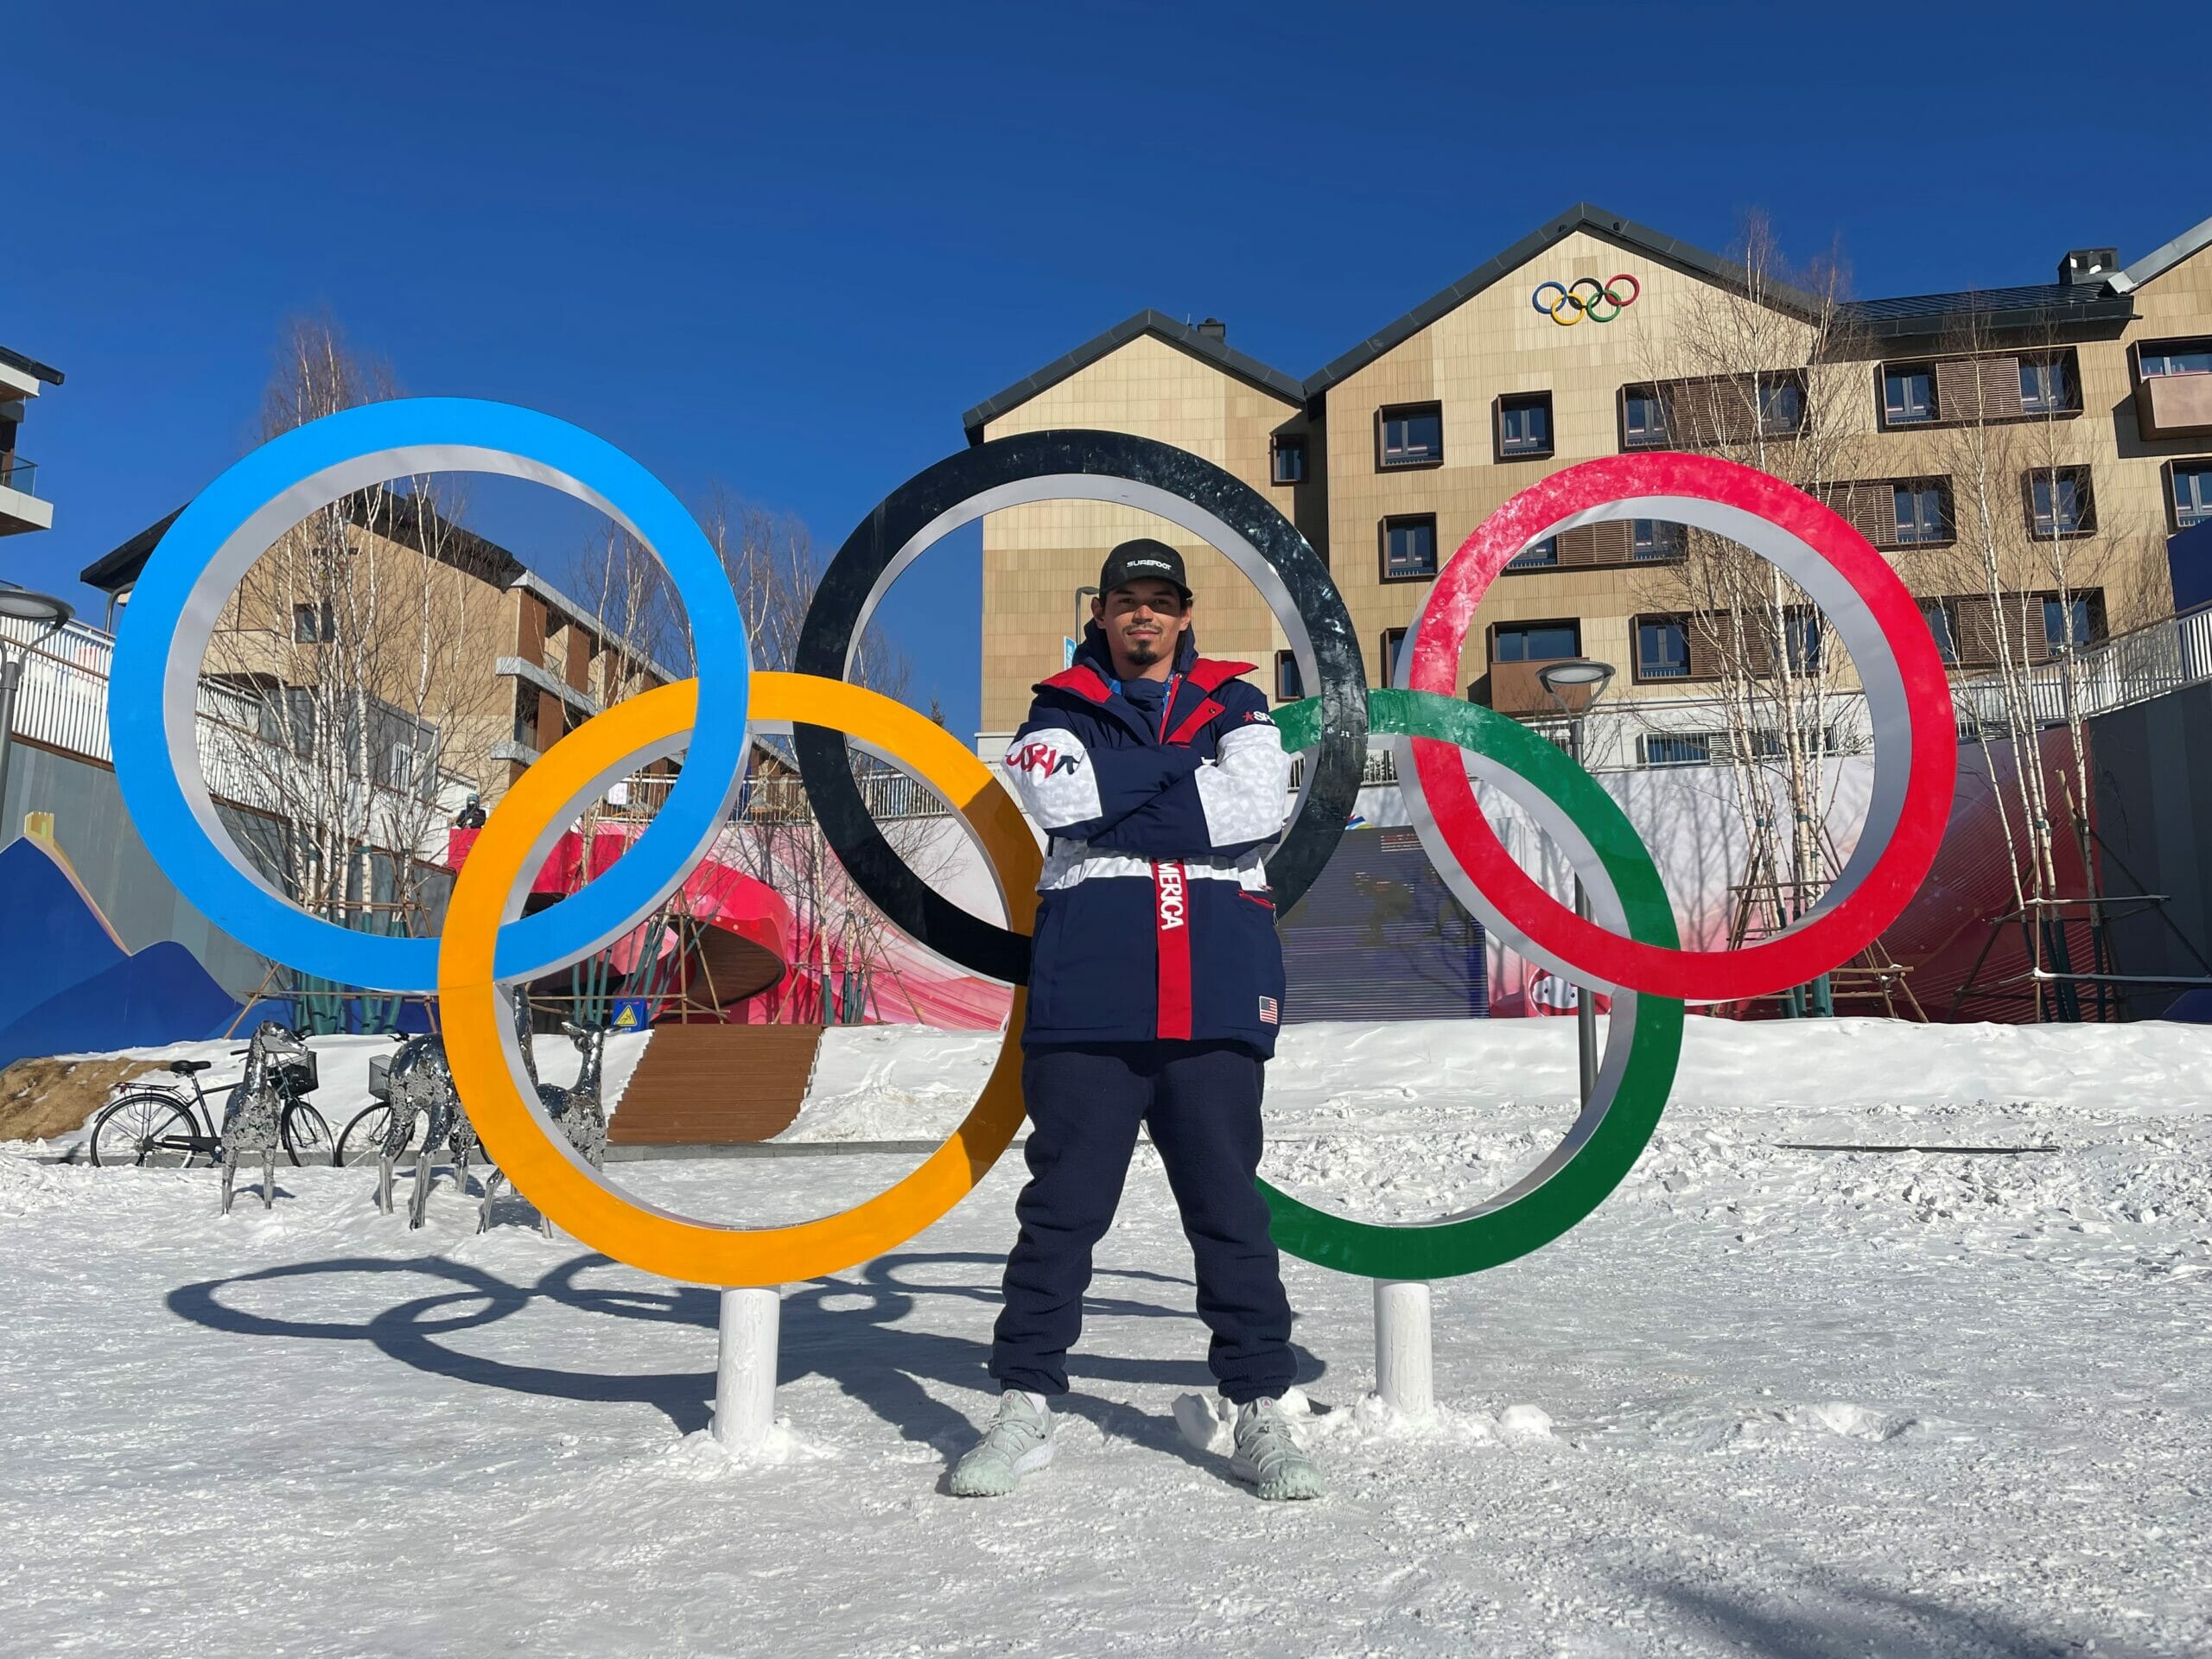 Olympian, Eric Loughran, standing on snow, in front of large Olympic rings